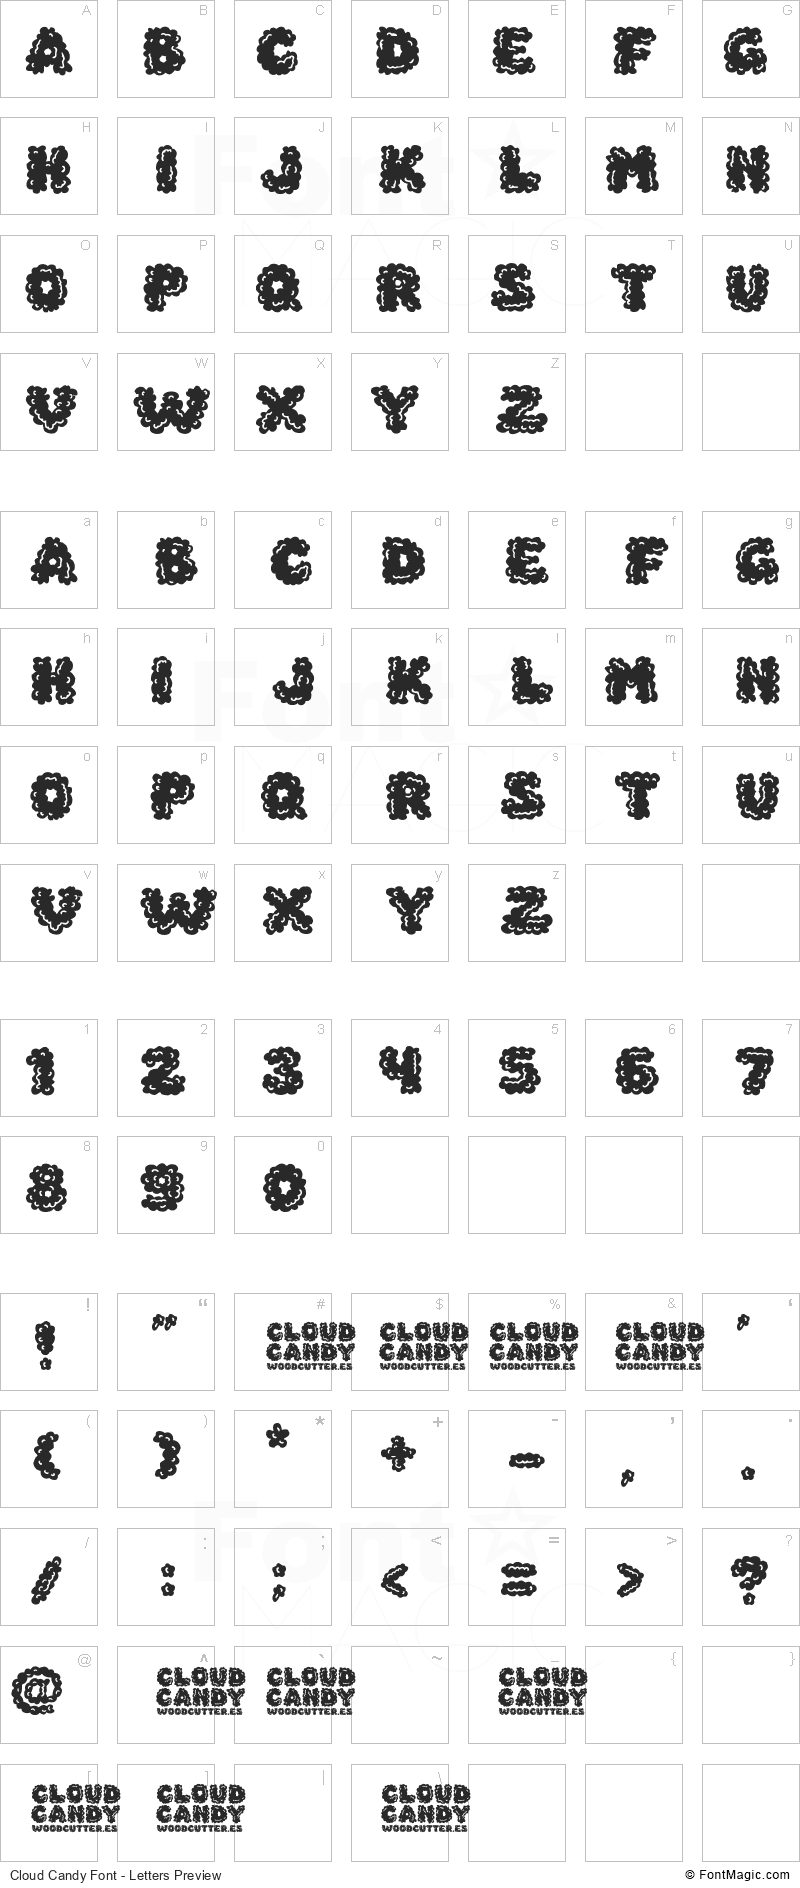 Cloud Candy Font - All Latters Preview Chart